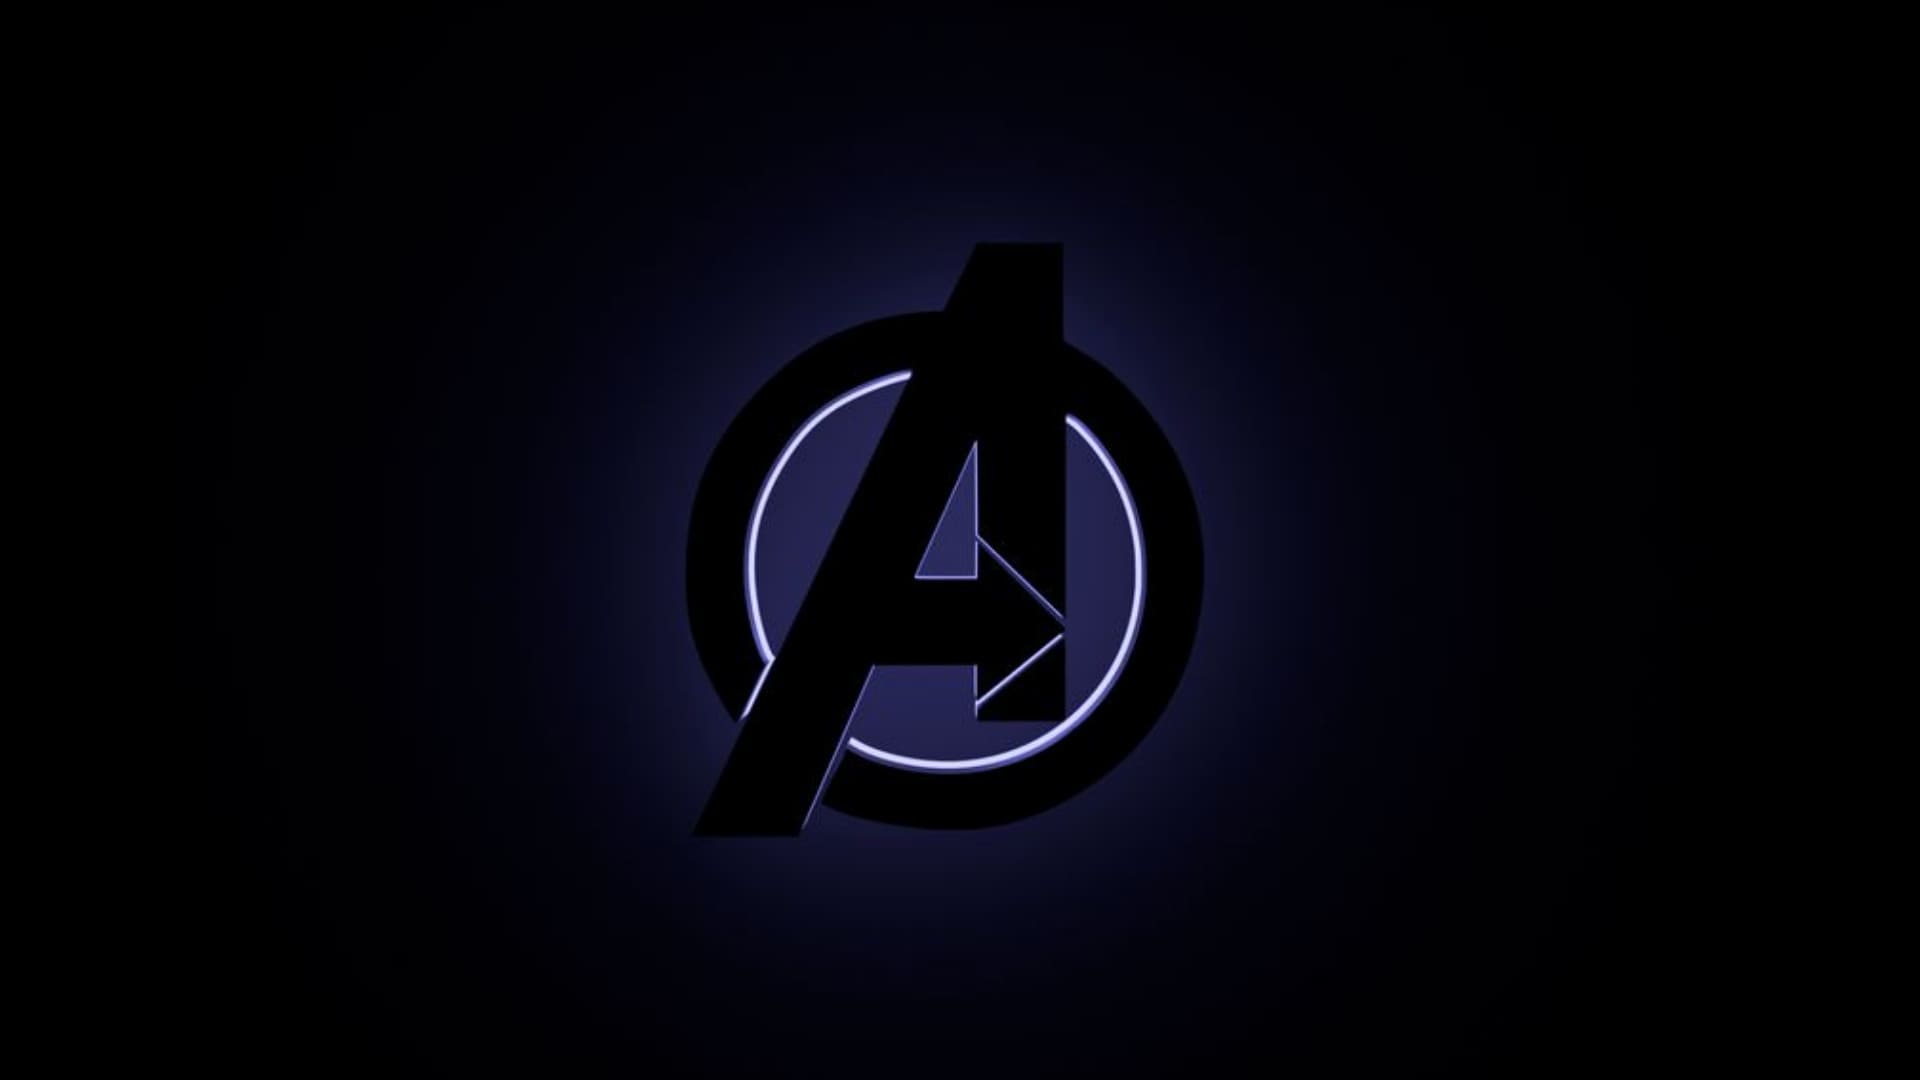 Avengers logo Download on 24wallpapers